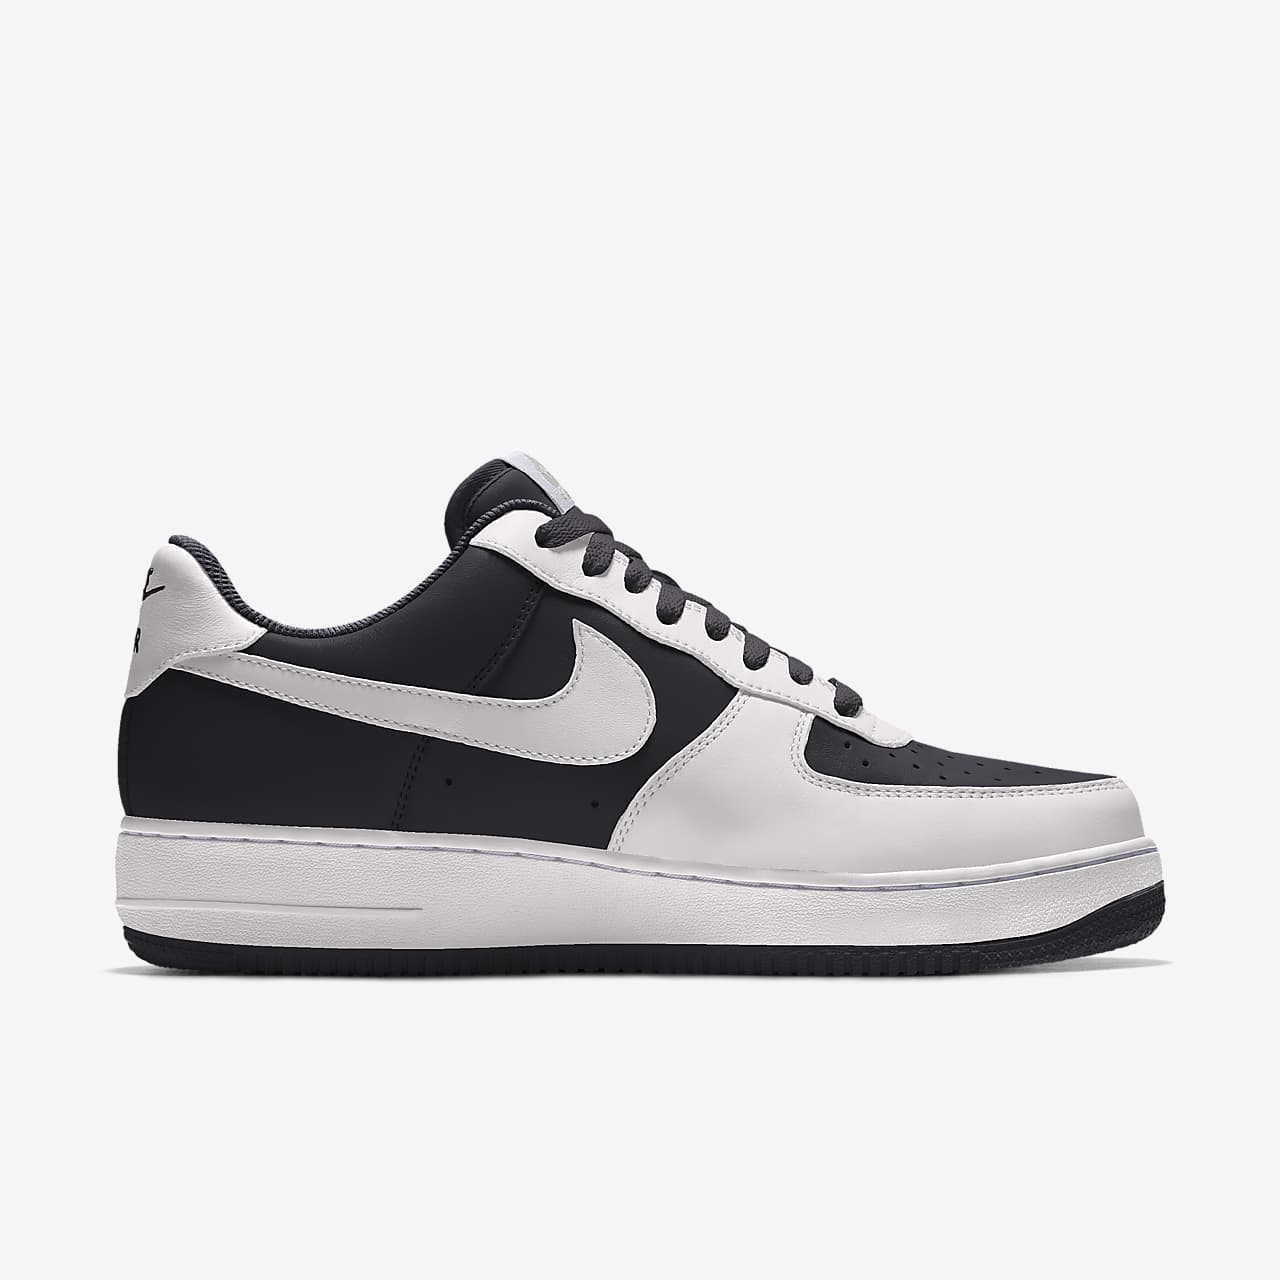 NIKE AIR FORCE 1 LOW BY YOU